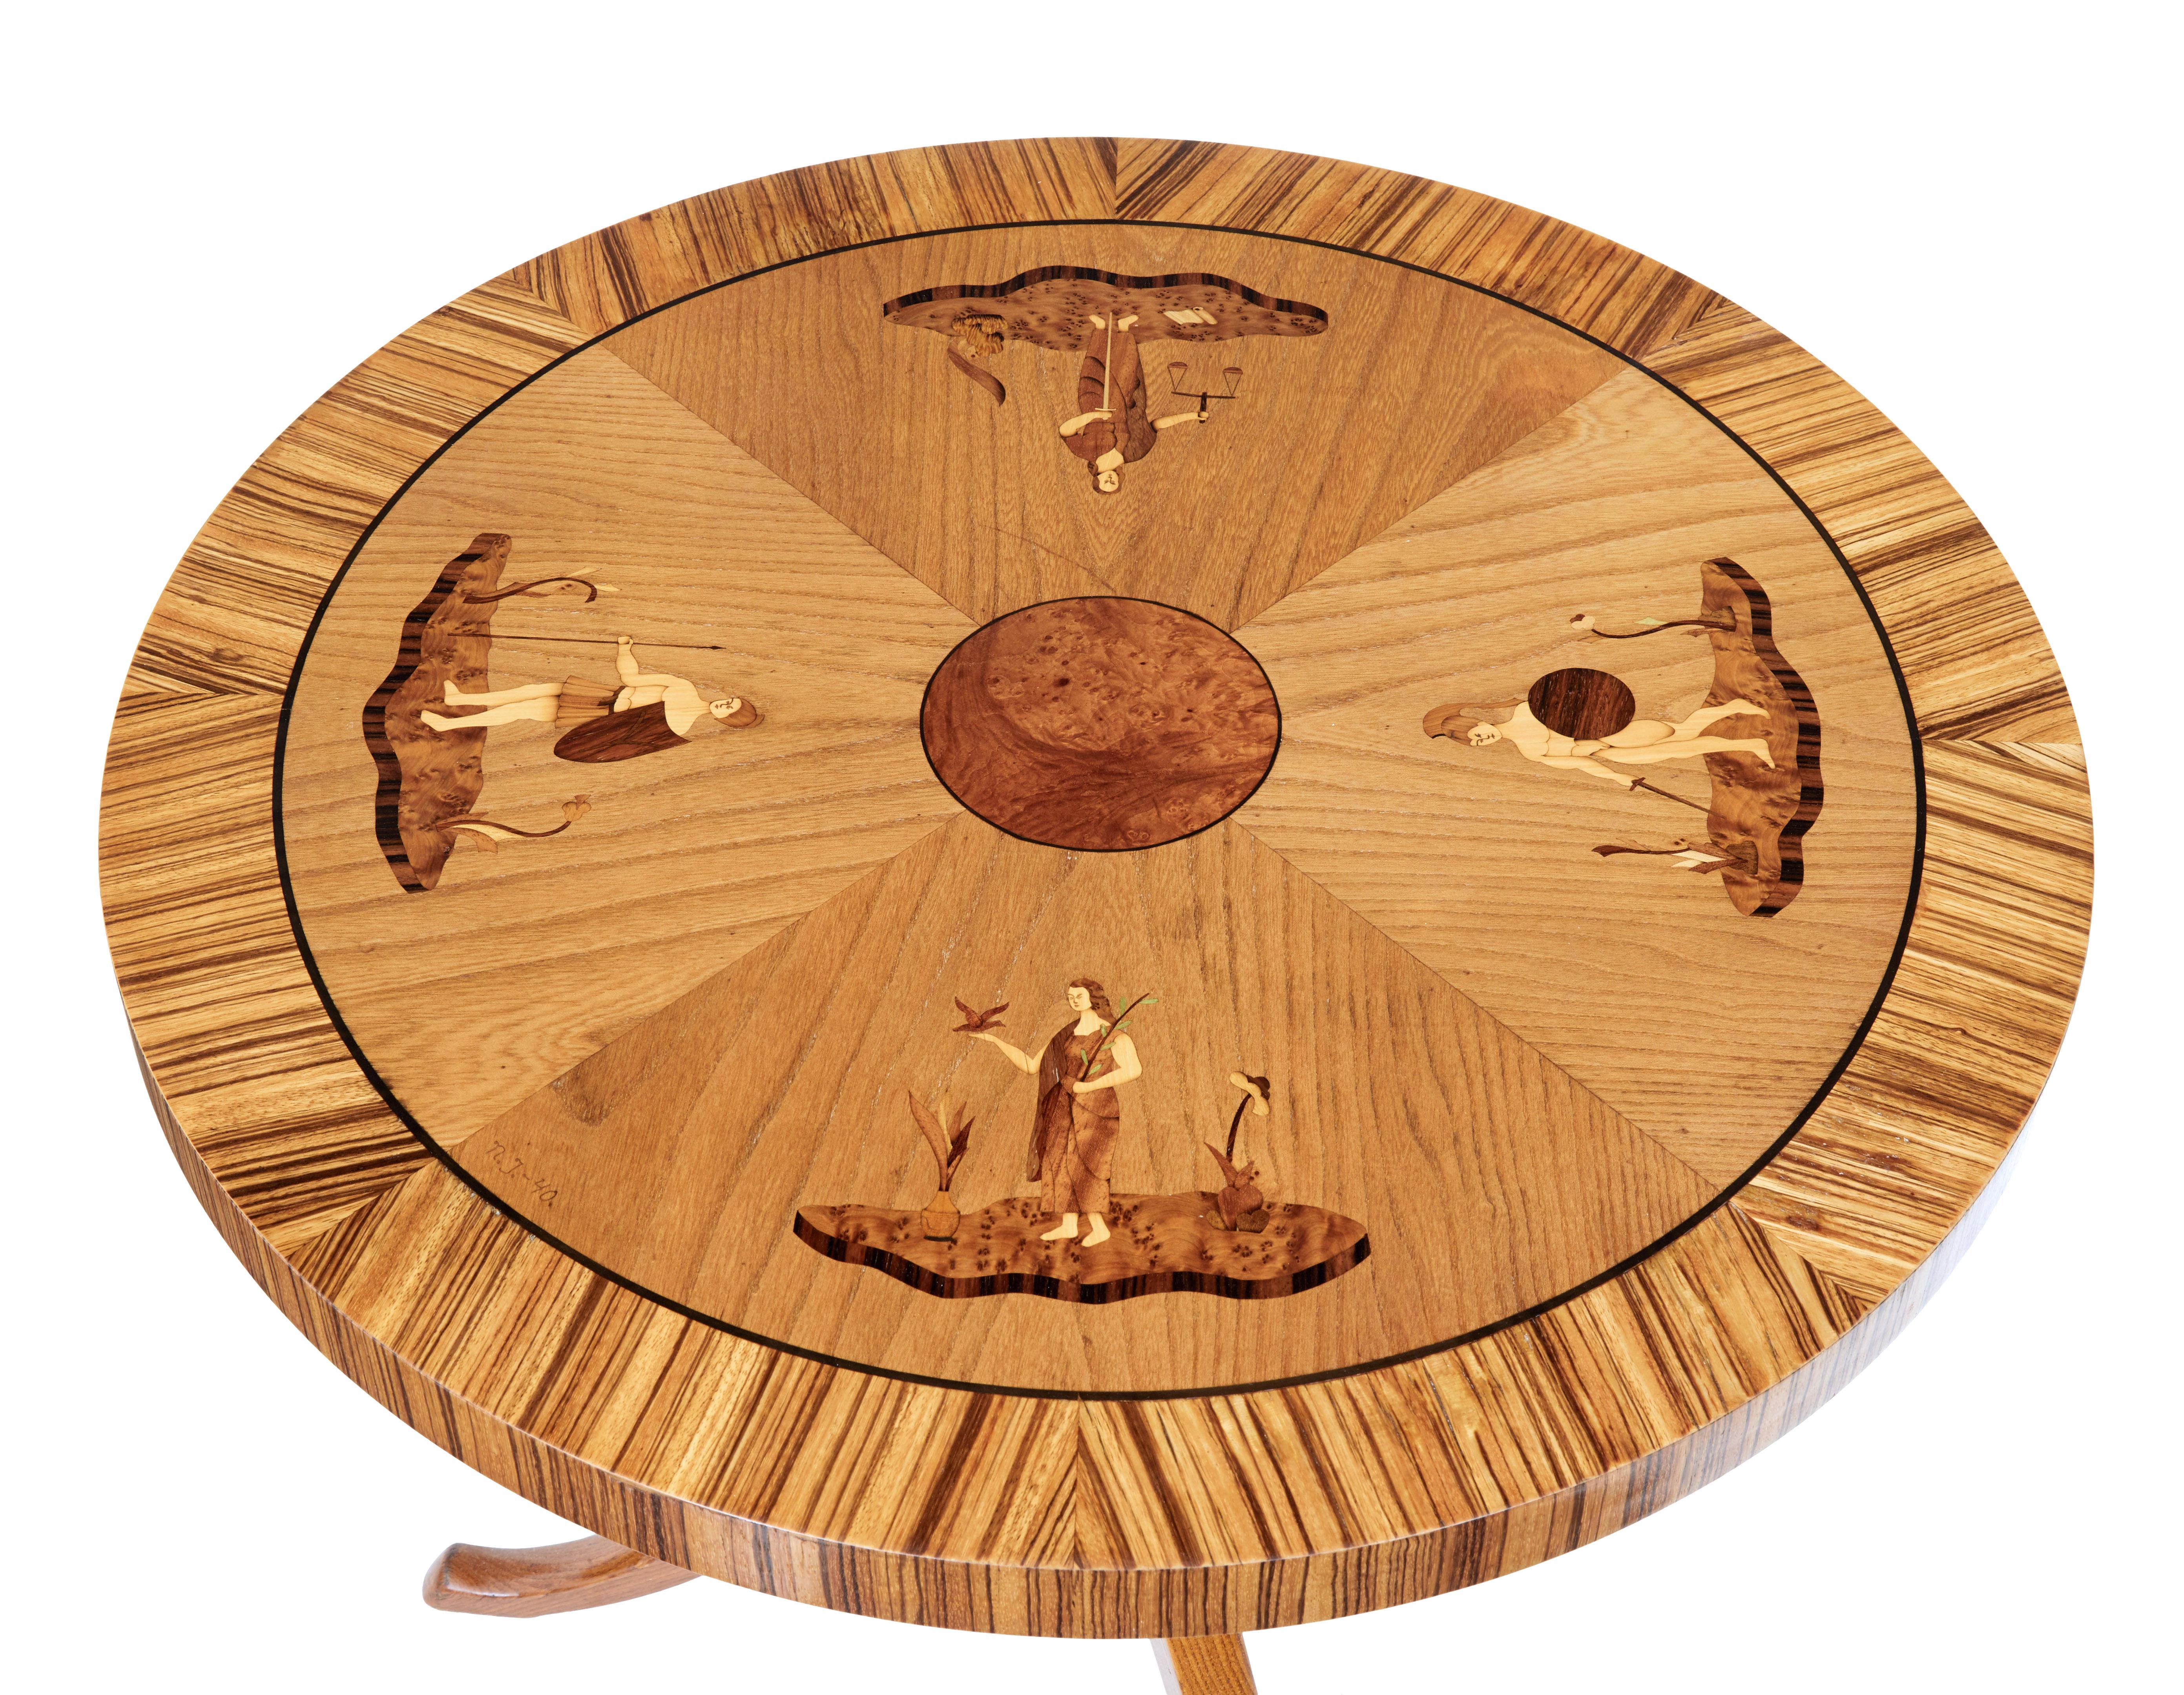 Late Art Deco Scandinavian coffee table, circa 1940.

Circular top, round burr centre surrounded by 4 mythical women on each quarter. Inlaid with walnut, rosewood and pear wood. Signed n.J with the date of '40.

Standing on an elm stem, 3 legs